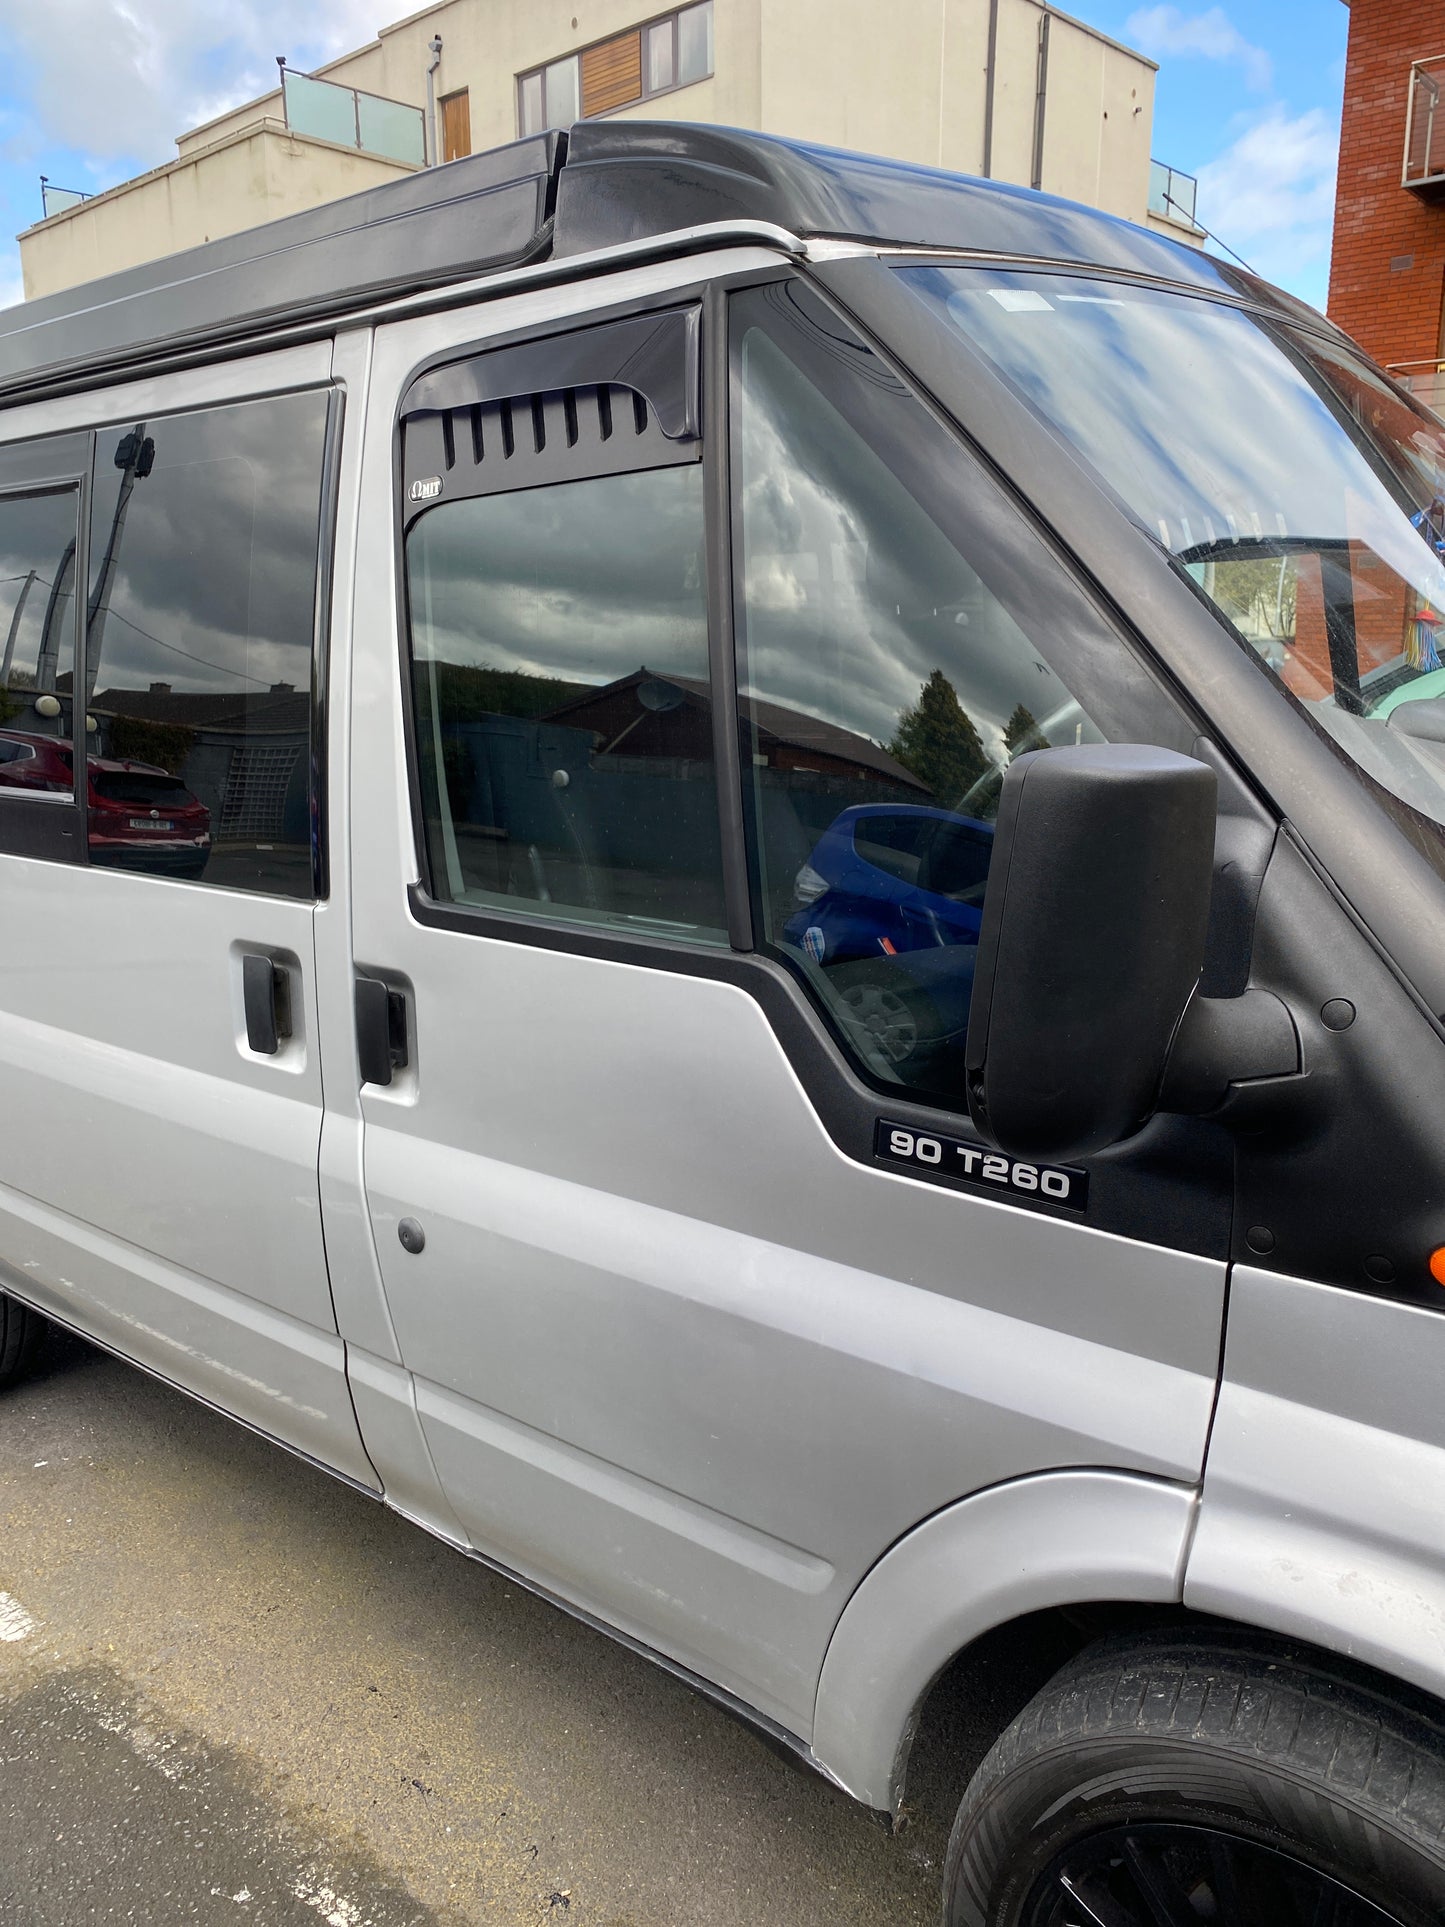 FORD TRANSIT 2006 TO 2014 MK7 WINDOW BUG VENTS